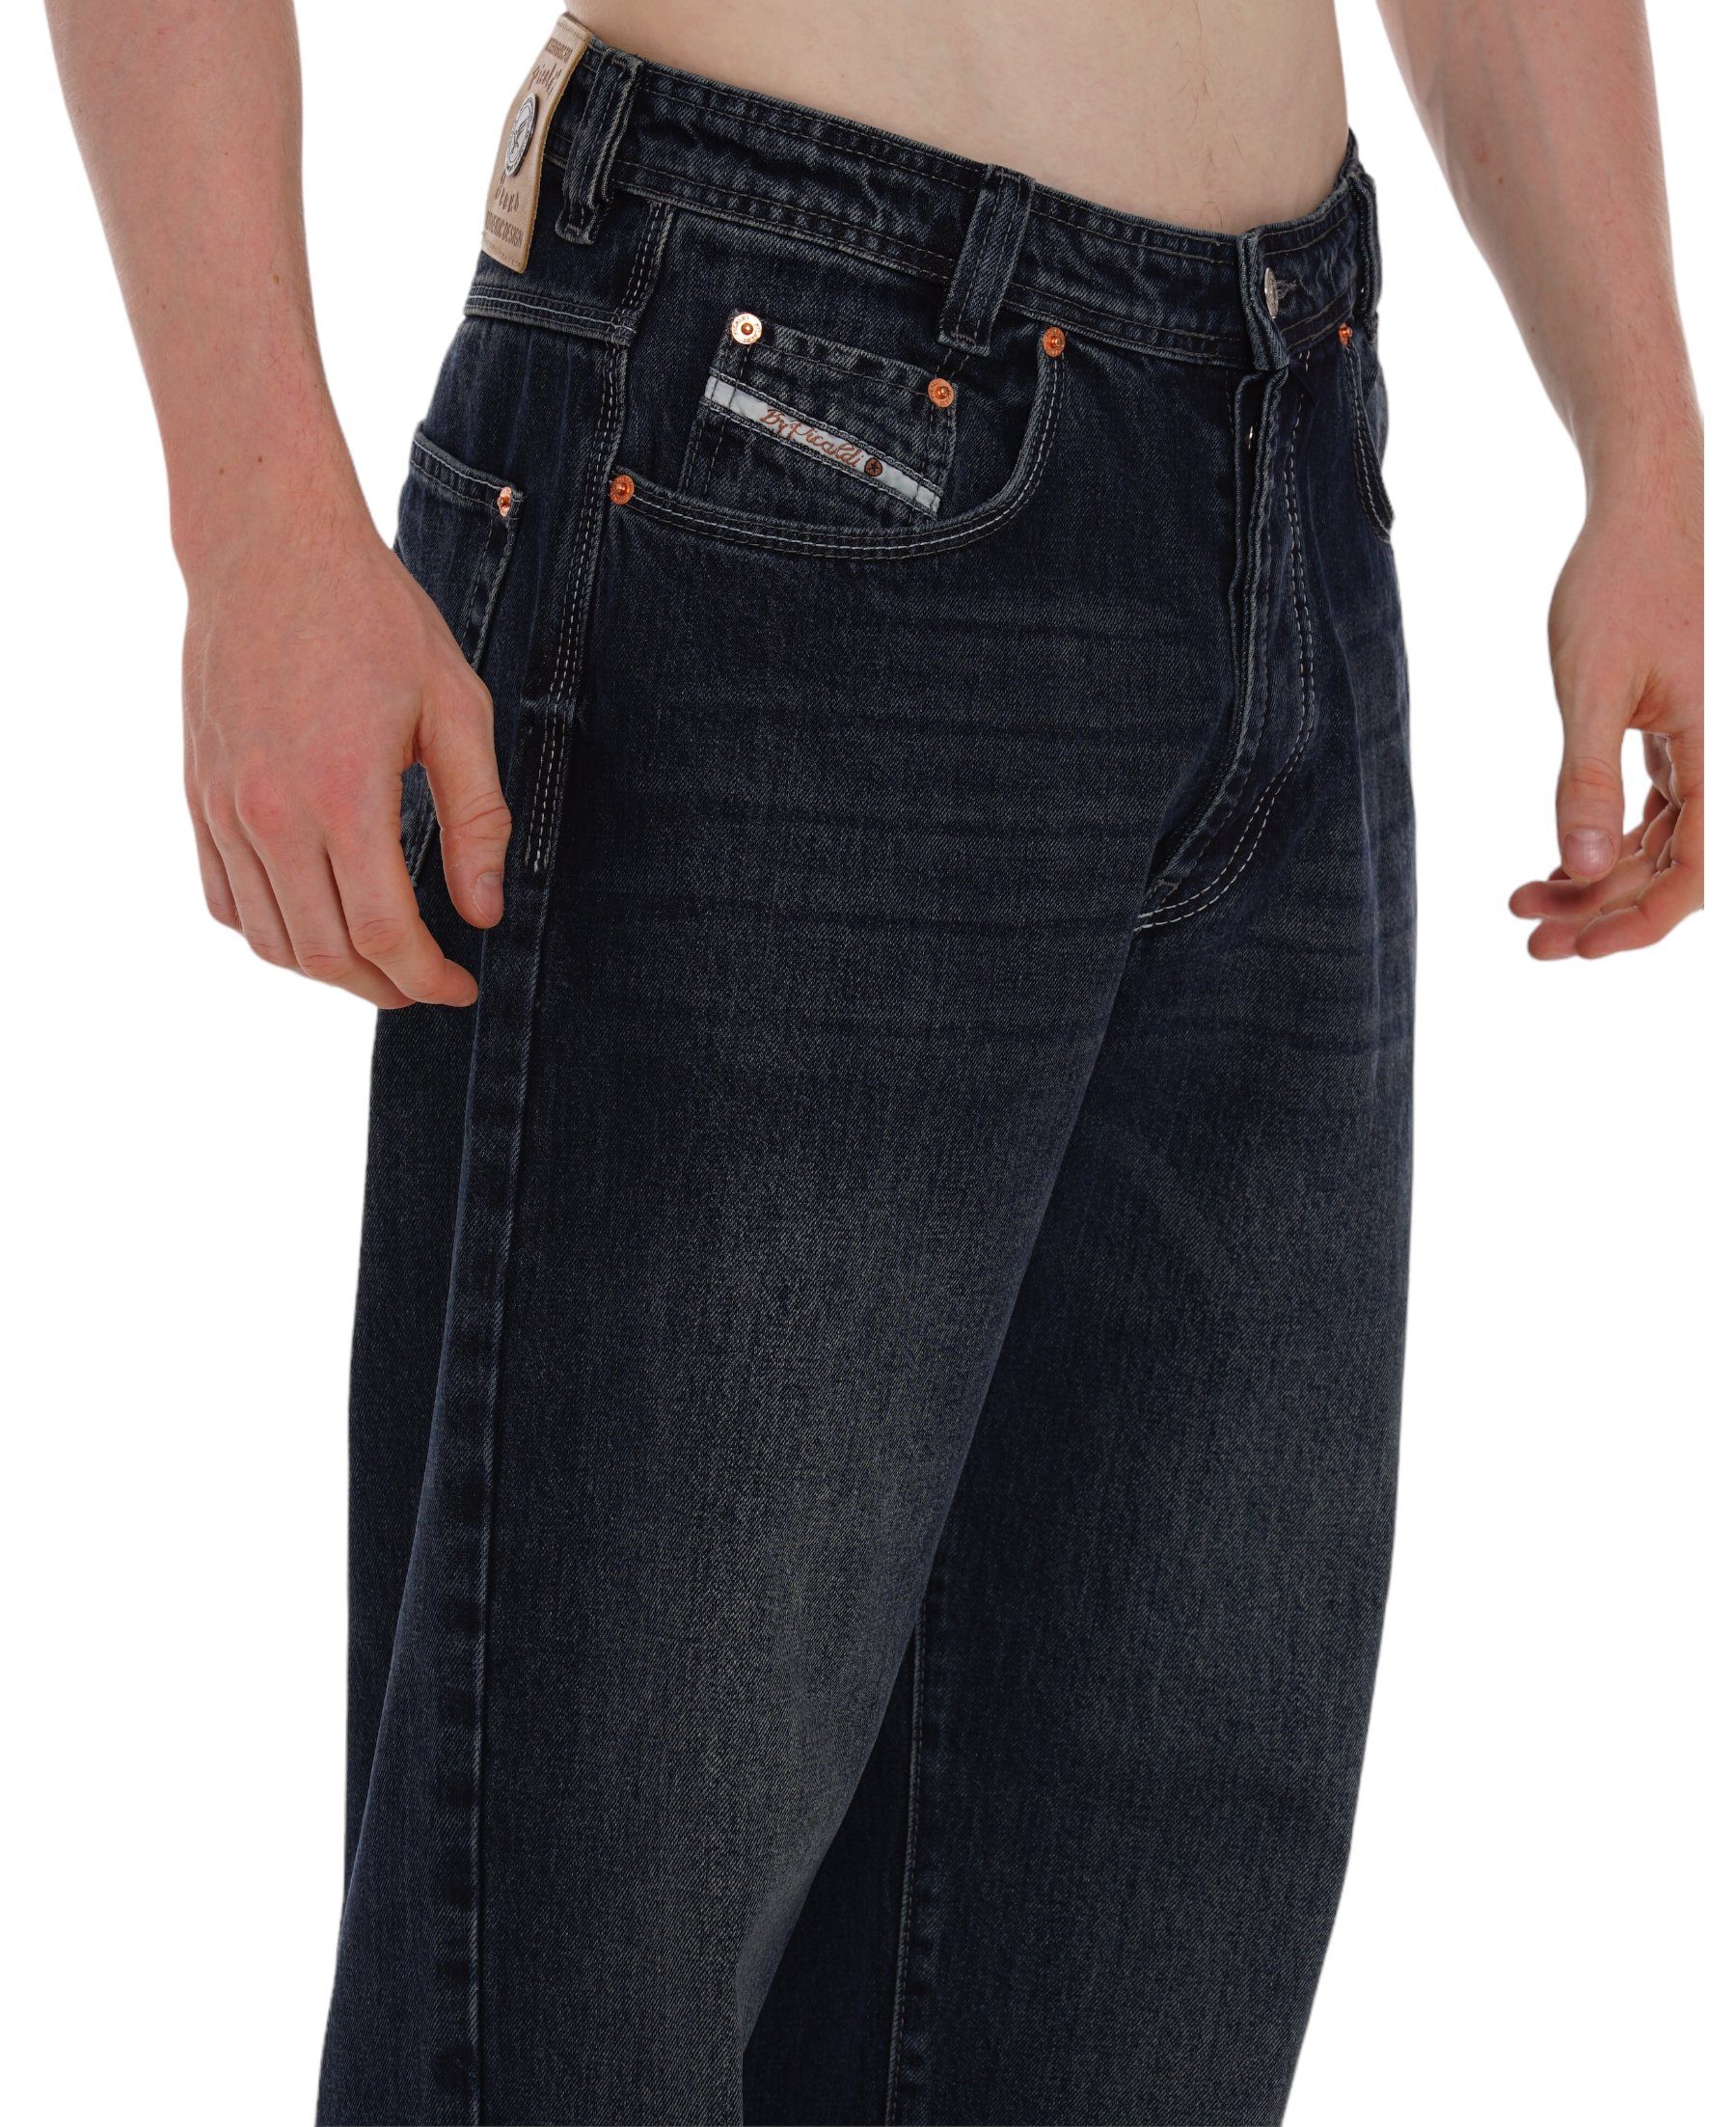 Loose Weite Jeans PICALDI Five 471 Fit, Jeans Pocket Jeans Zicco Miracle